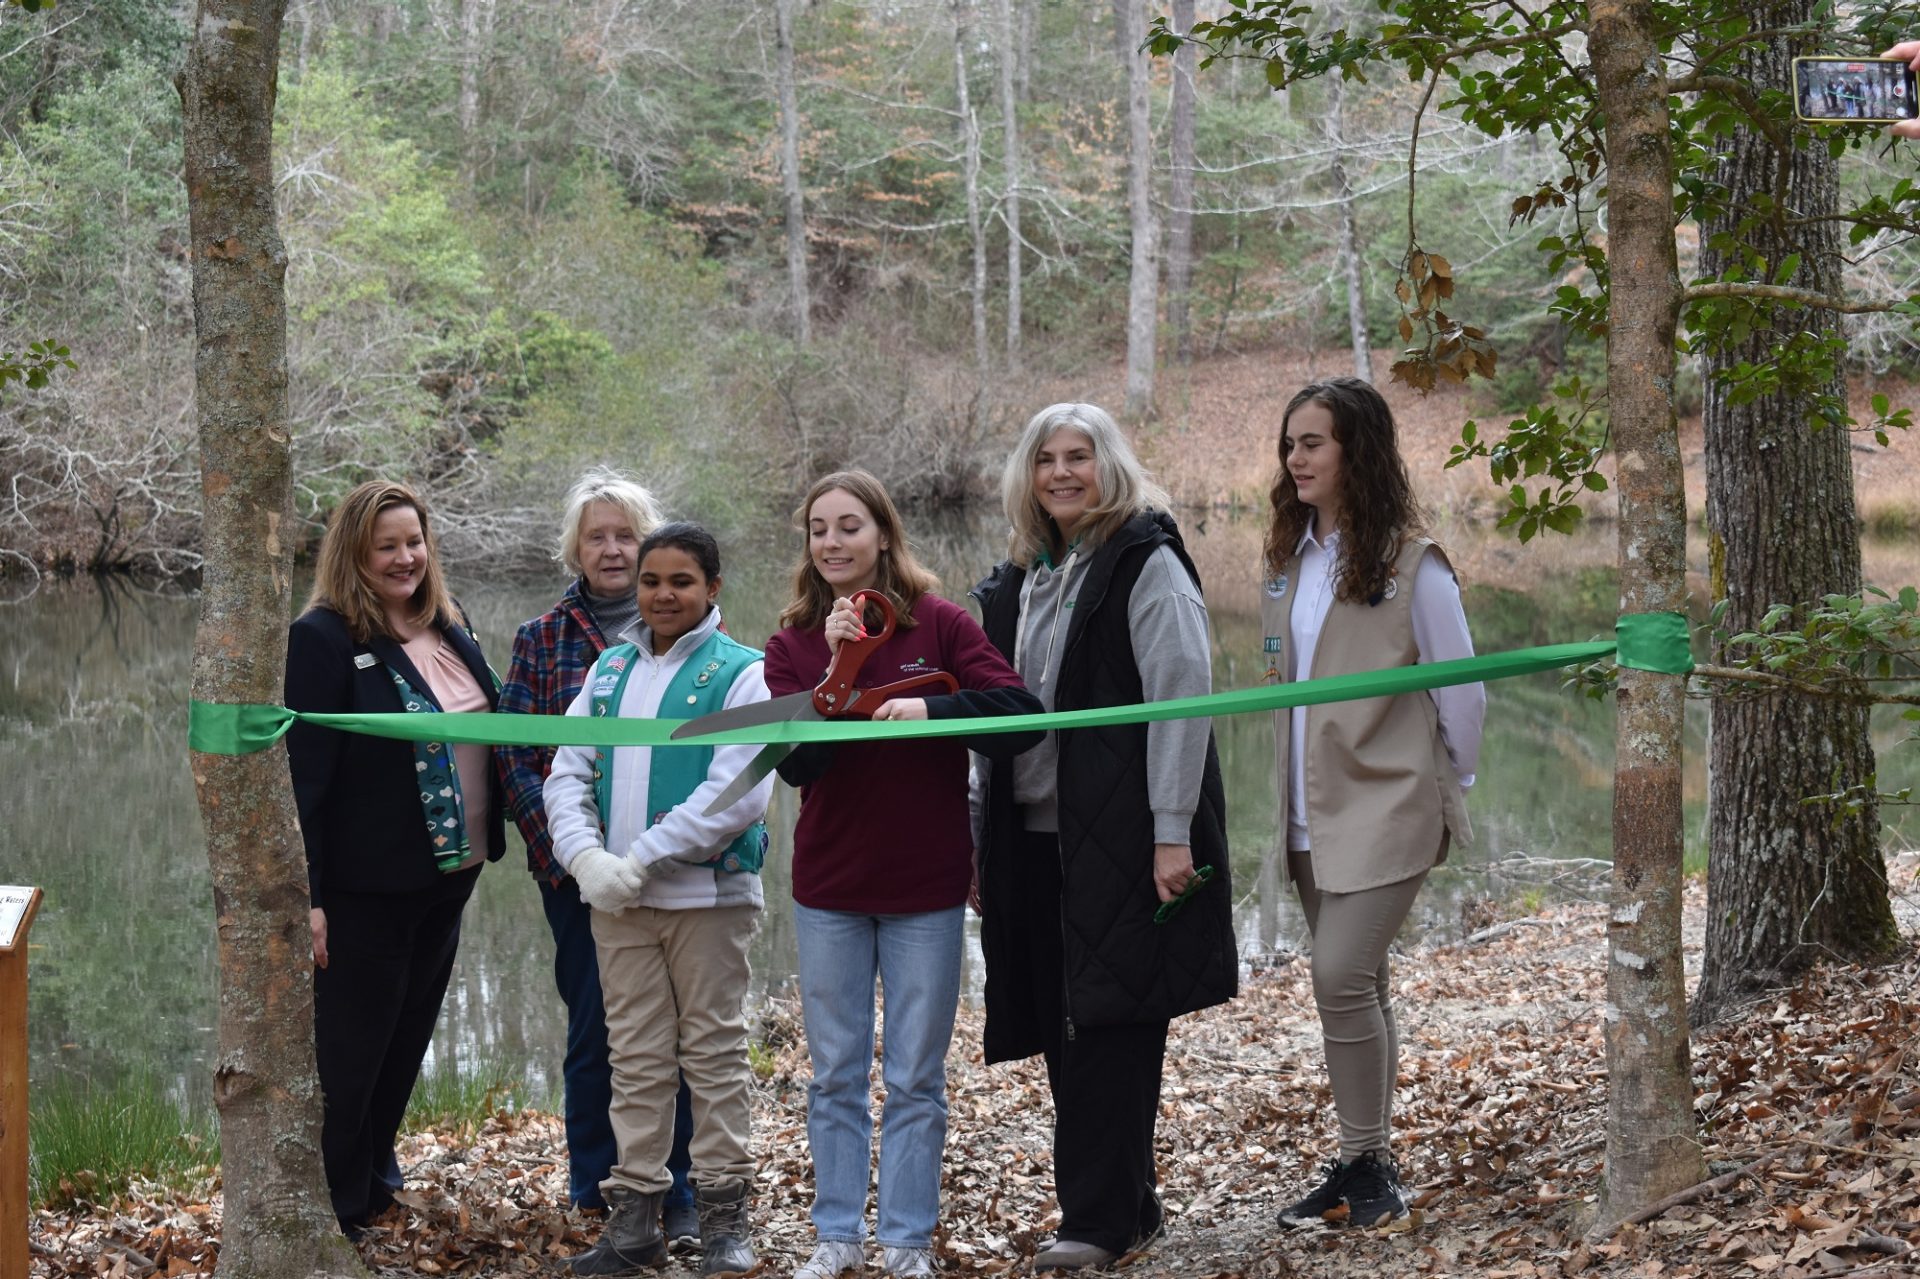  Ribbon cutting ceremony at Camp Skimino on Girl Scouts Birthday, March 12, 2023 